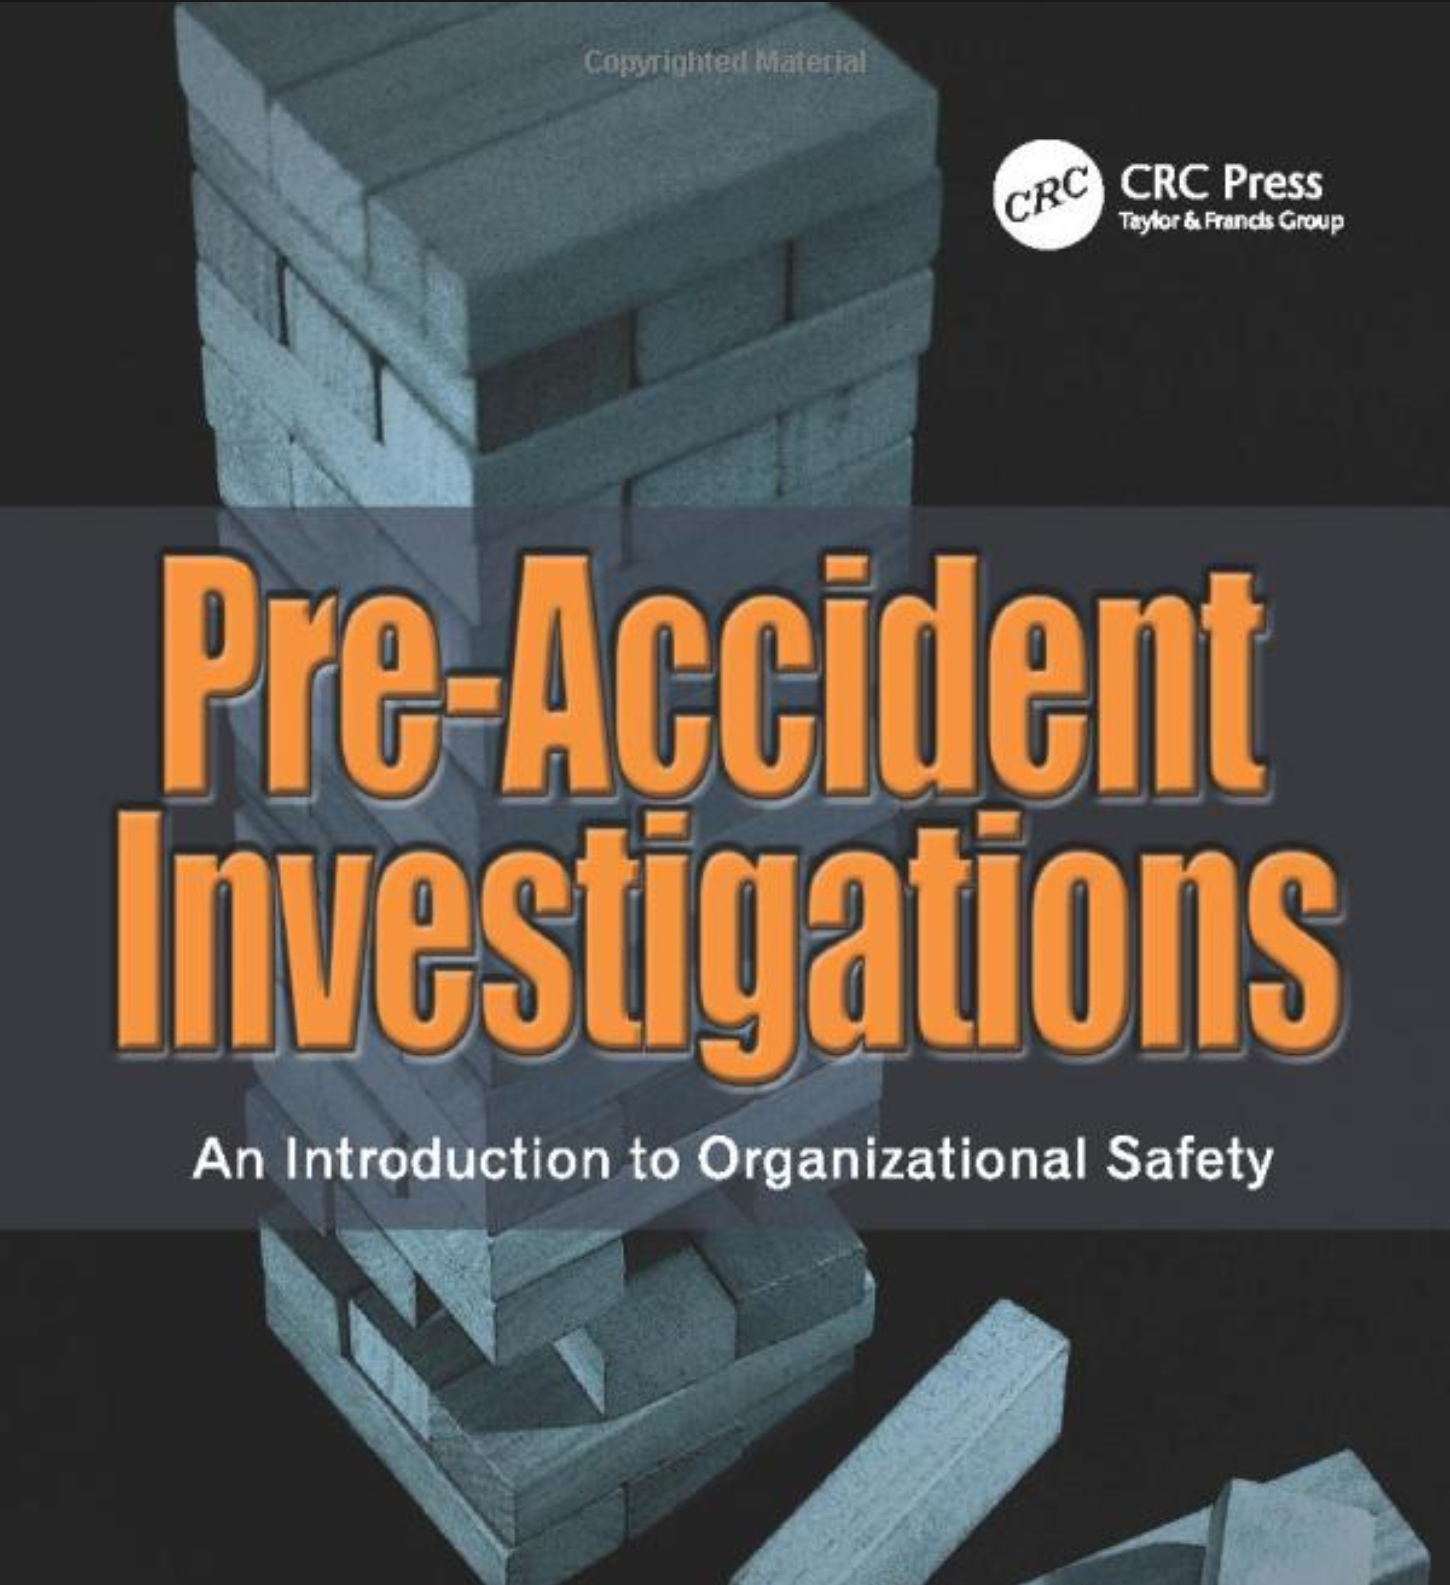 safety book title_Pre Accident Investigations_organizational safety_screenshot.png